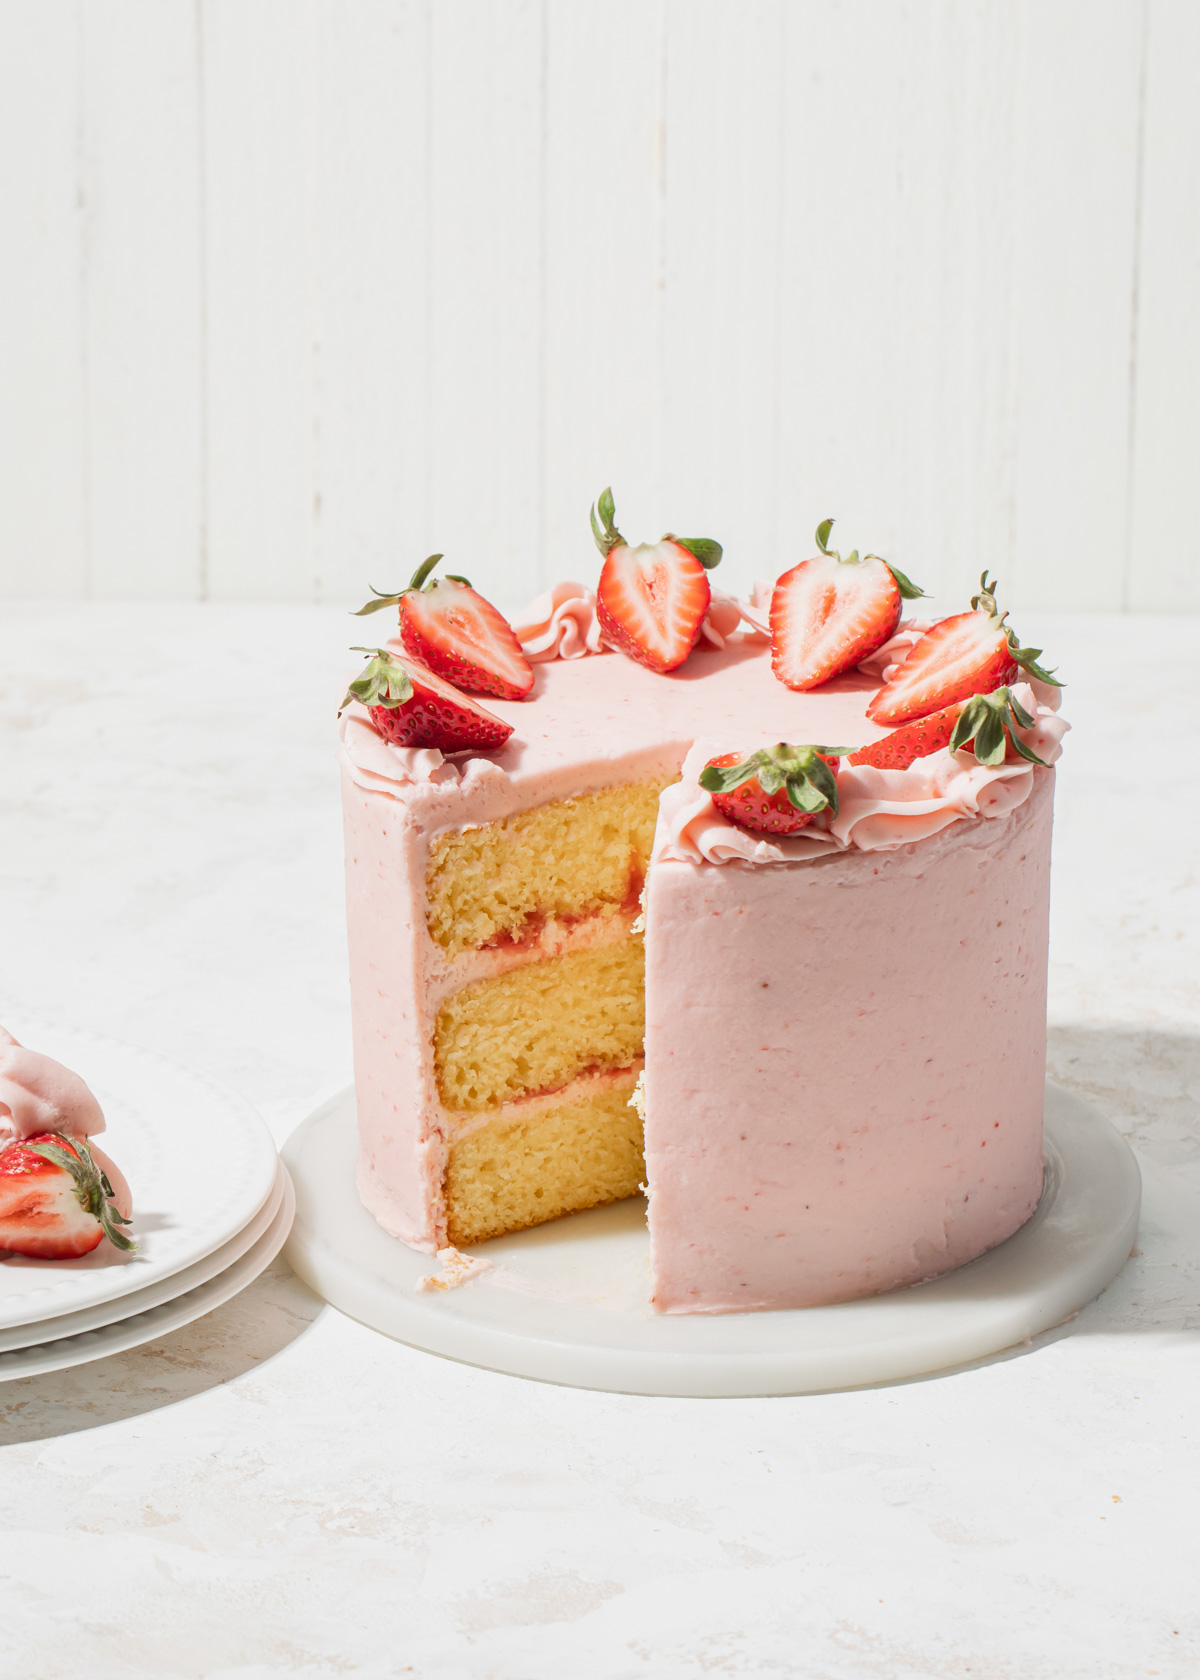 50 Layer Cake Filling Ideas: How to Make Layer Cake (Recipes)